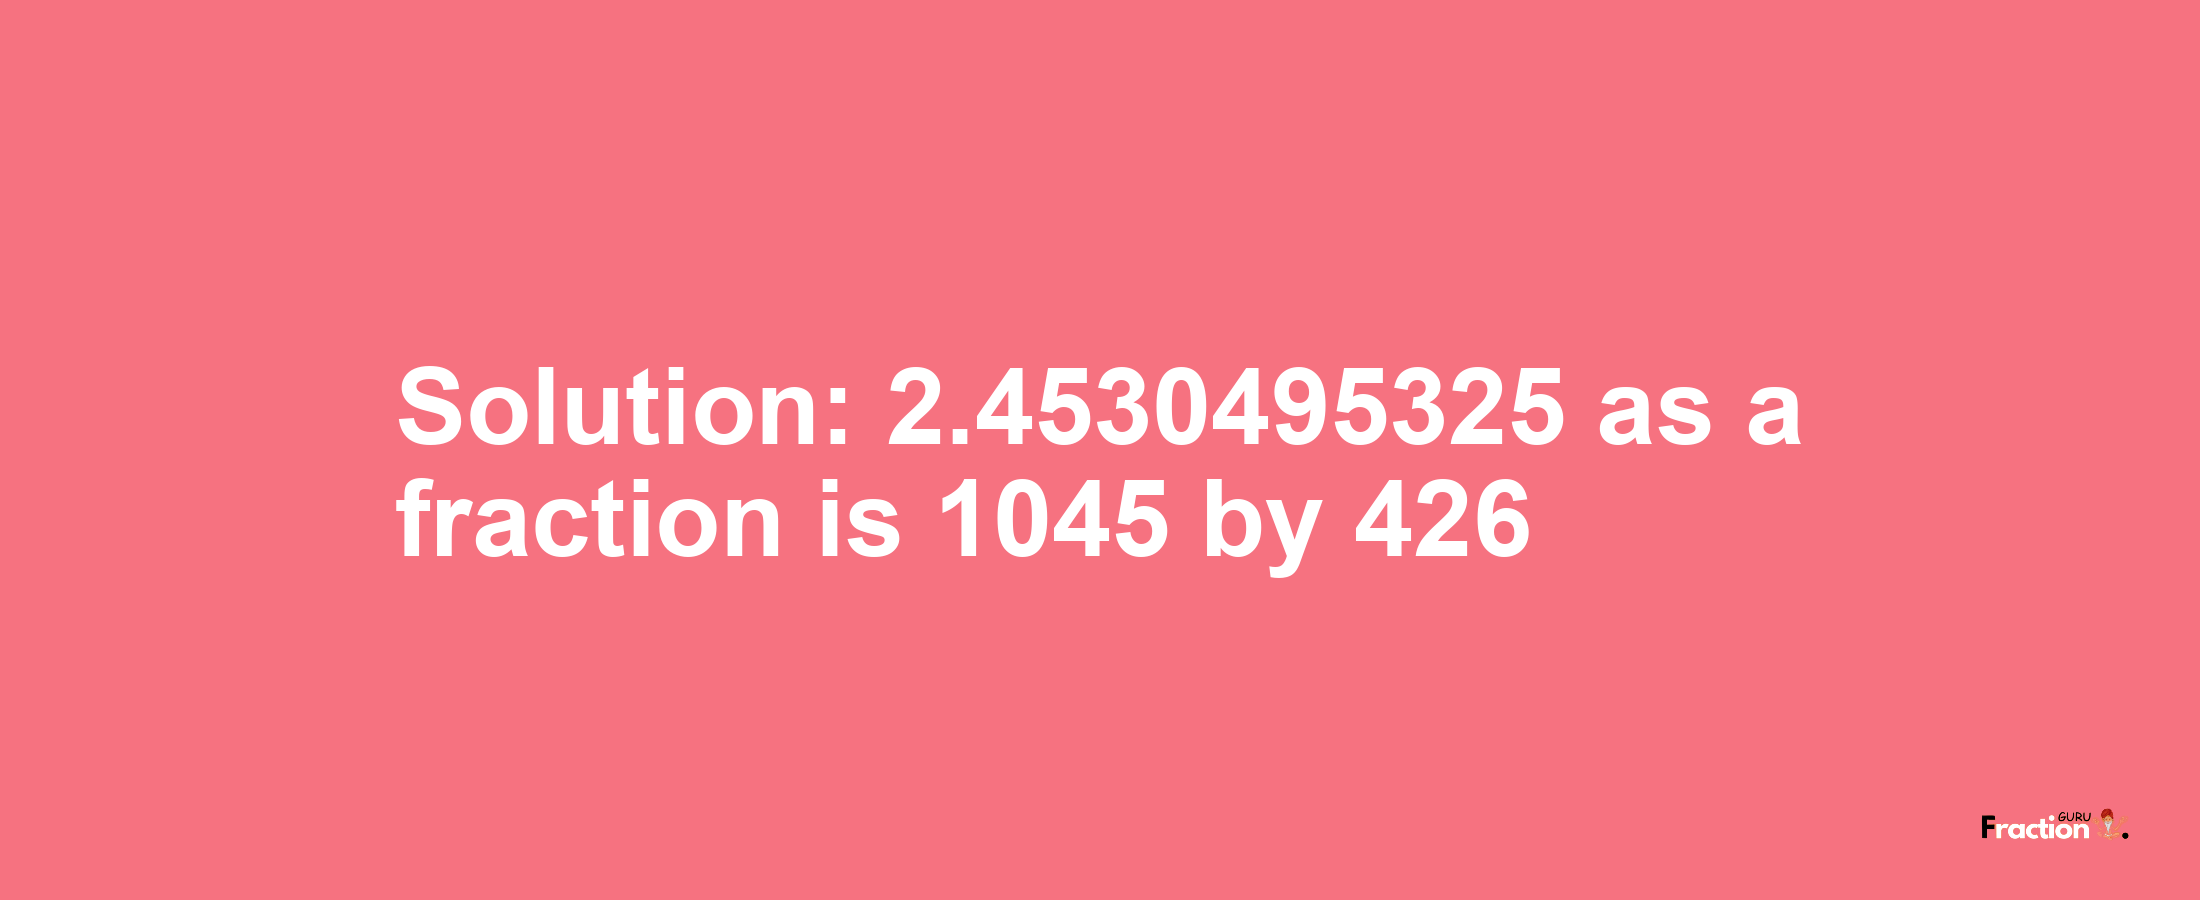 Solution:2.4530495325 as a fraction is 1045/426